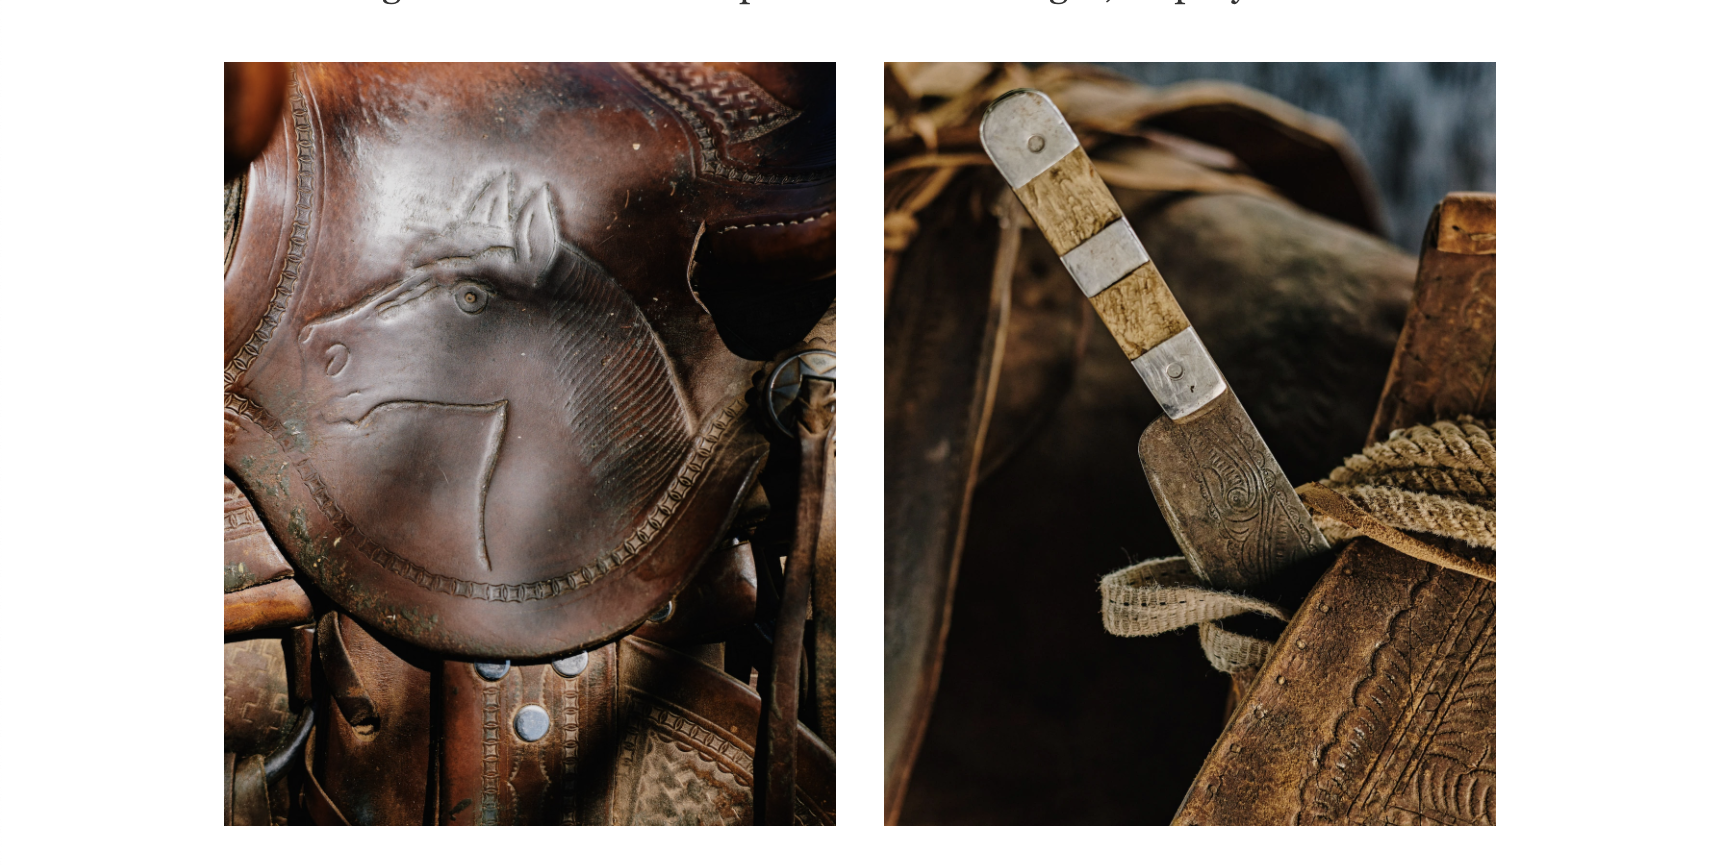 Mexico's cowboys struggle to maintain traditional lifestyle | Photographs by Balazs Gardi -  Left : Saddles are among the many works with leather made by Baja cowboys, or vaqueros, in Baja...